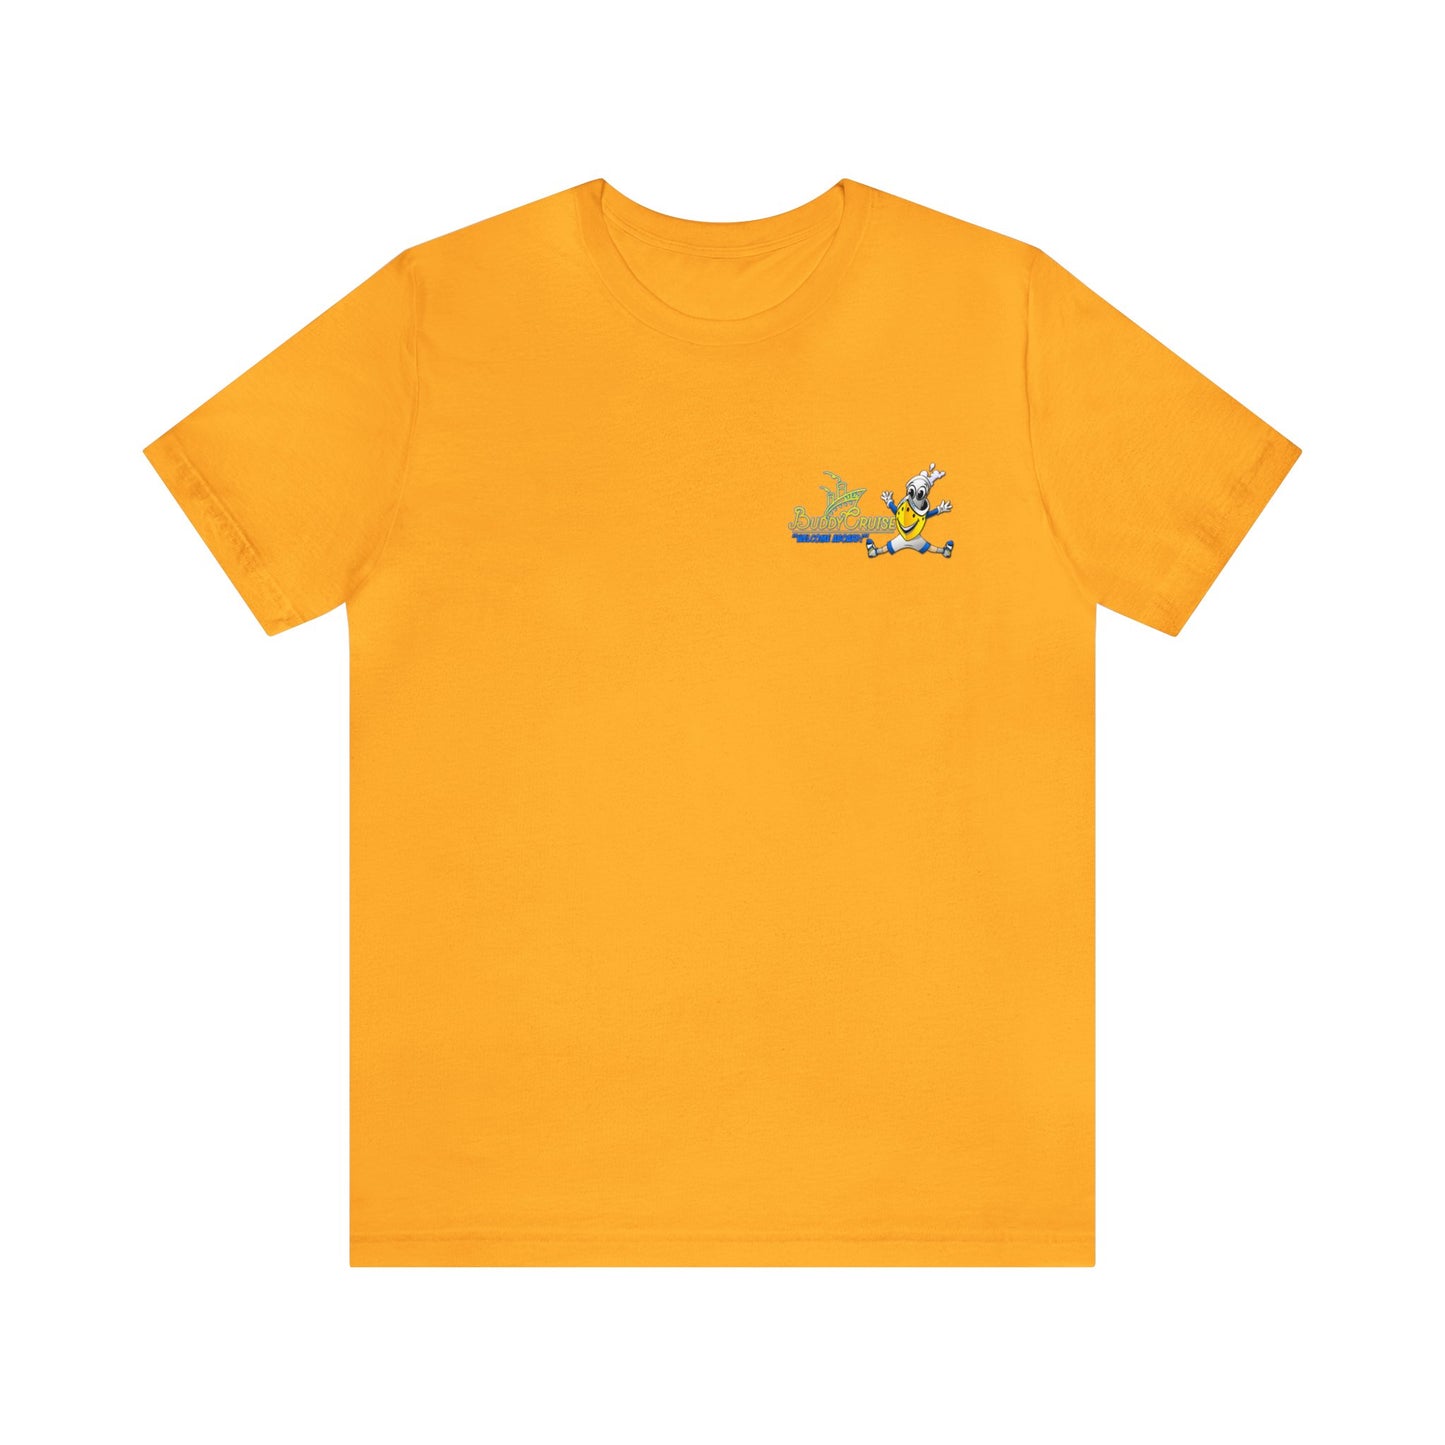 BUDDY CRUISE Unisex Jersey Short Sleeve Tee in 9 Colors